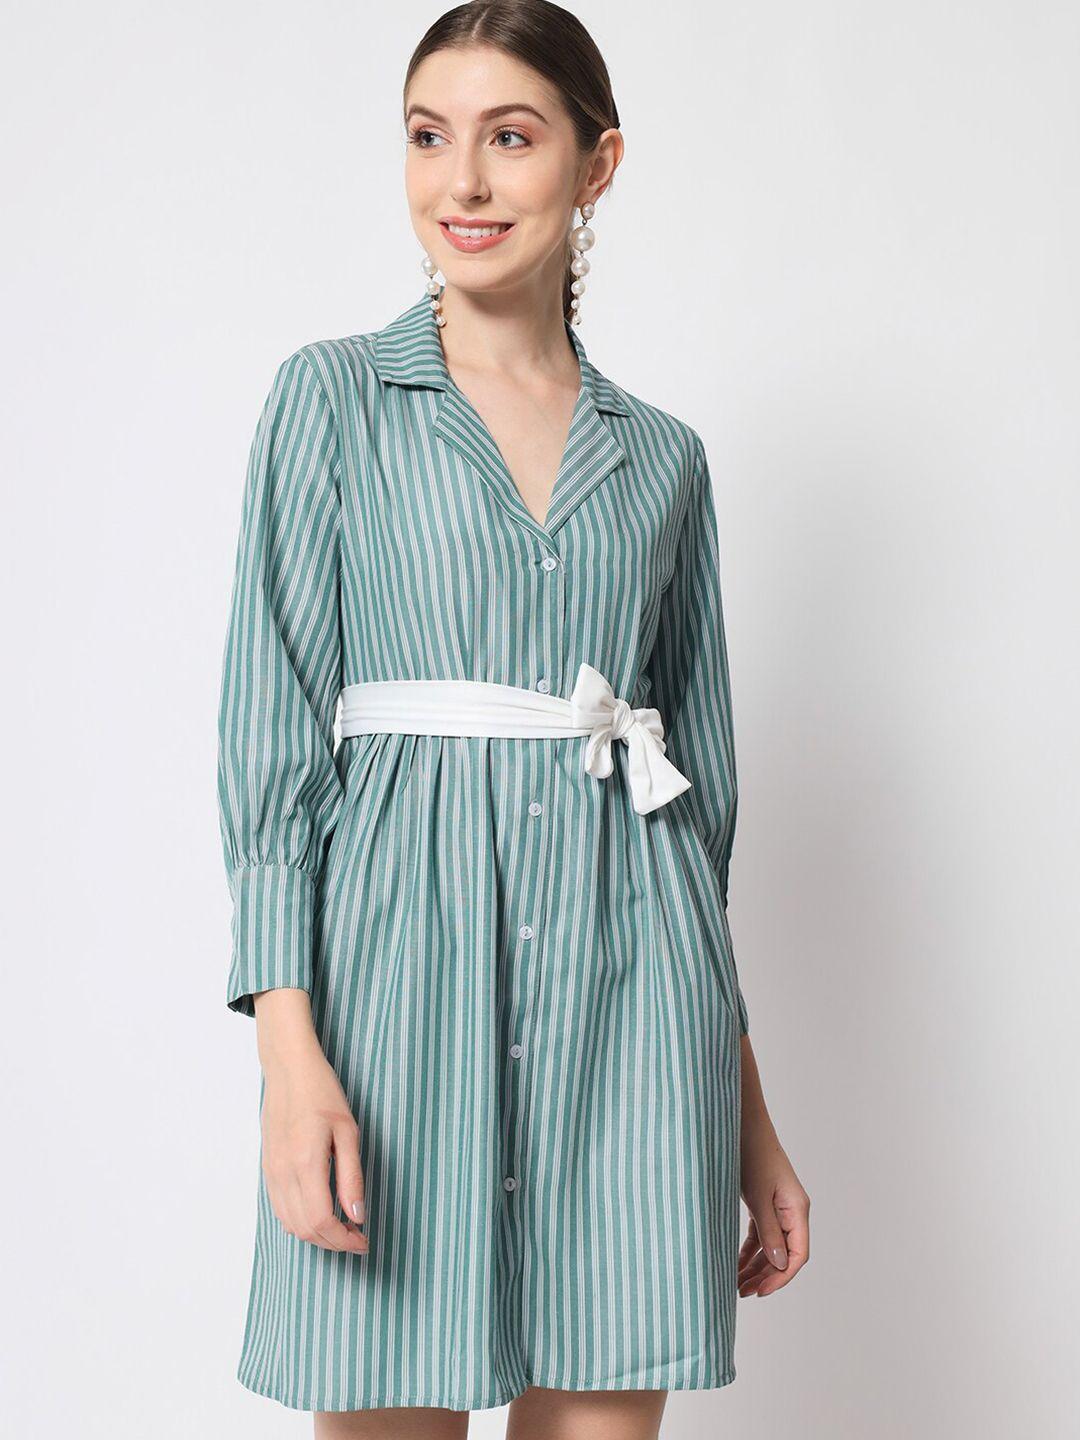 orchid hues cuffed sleeve striped cotton shirt dress